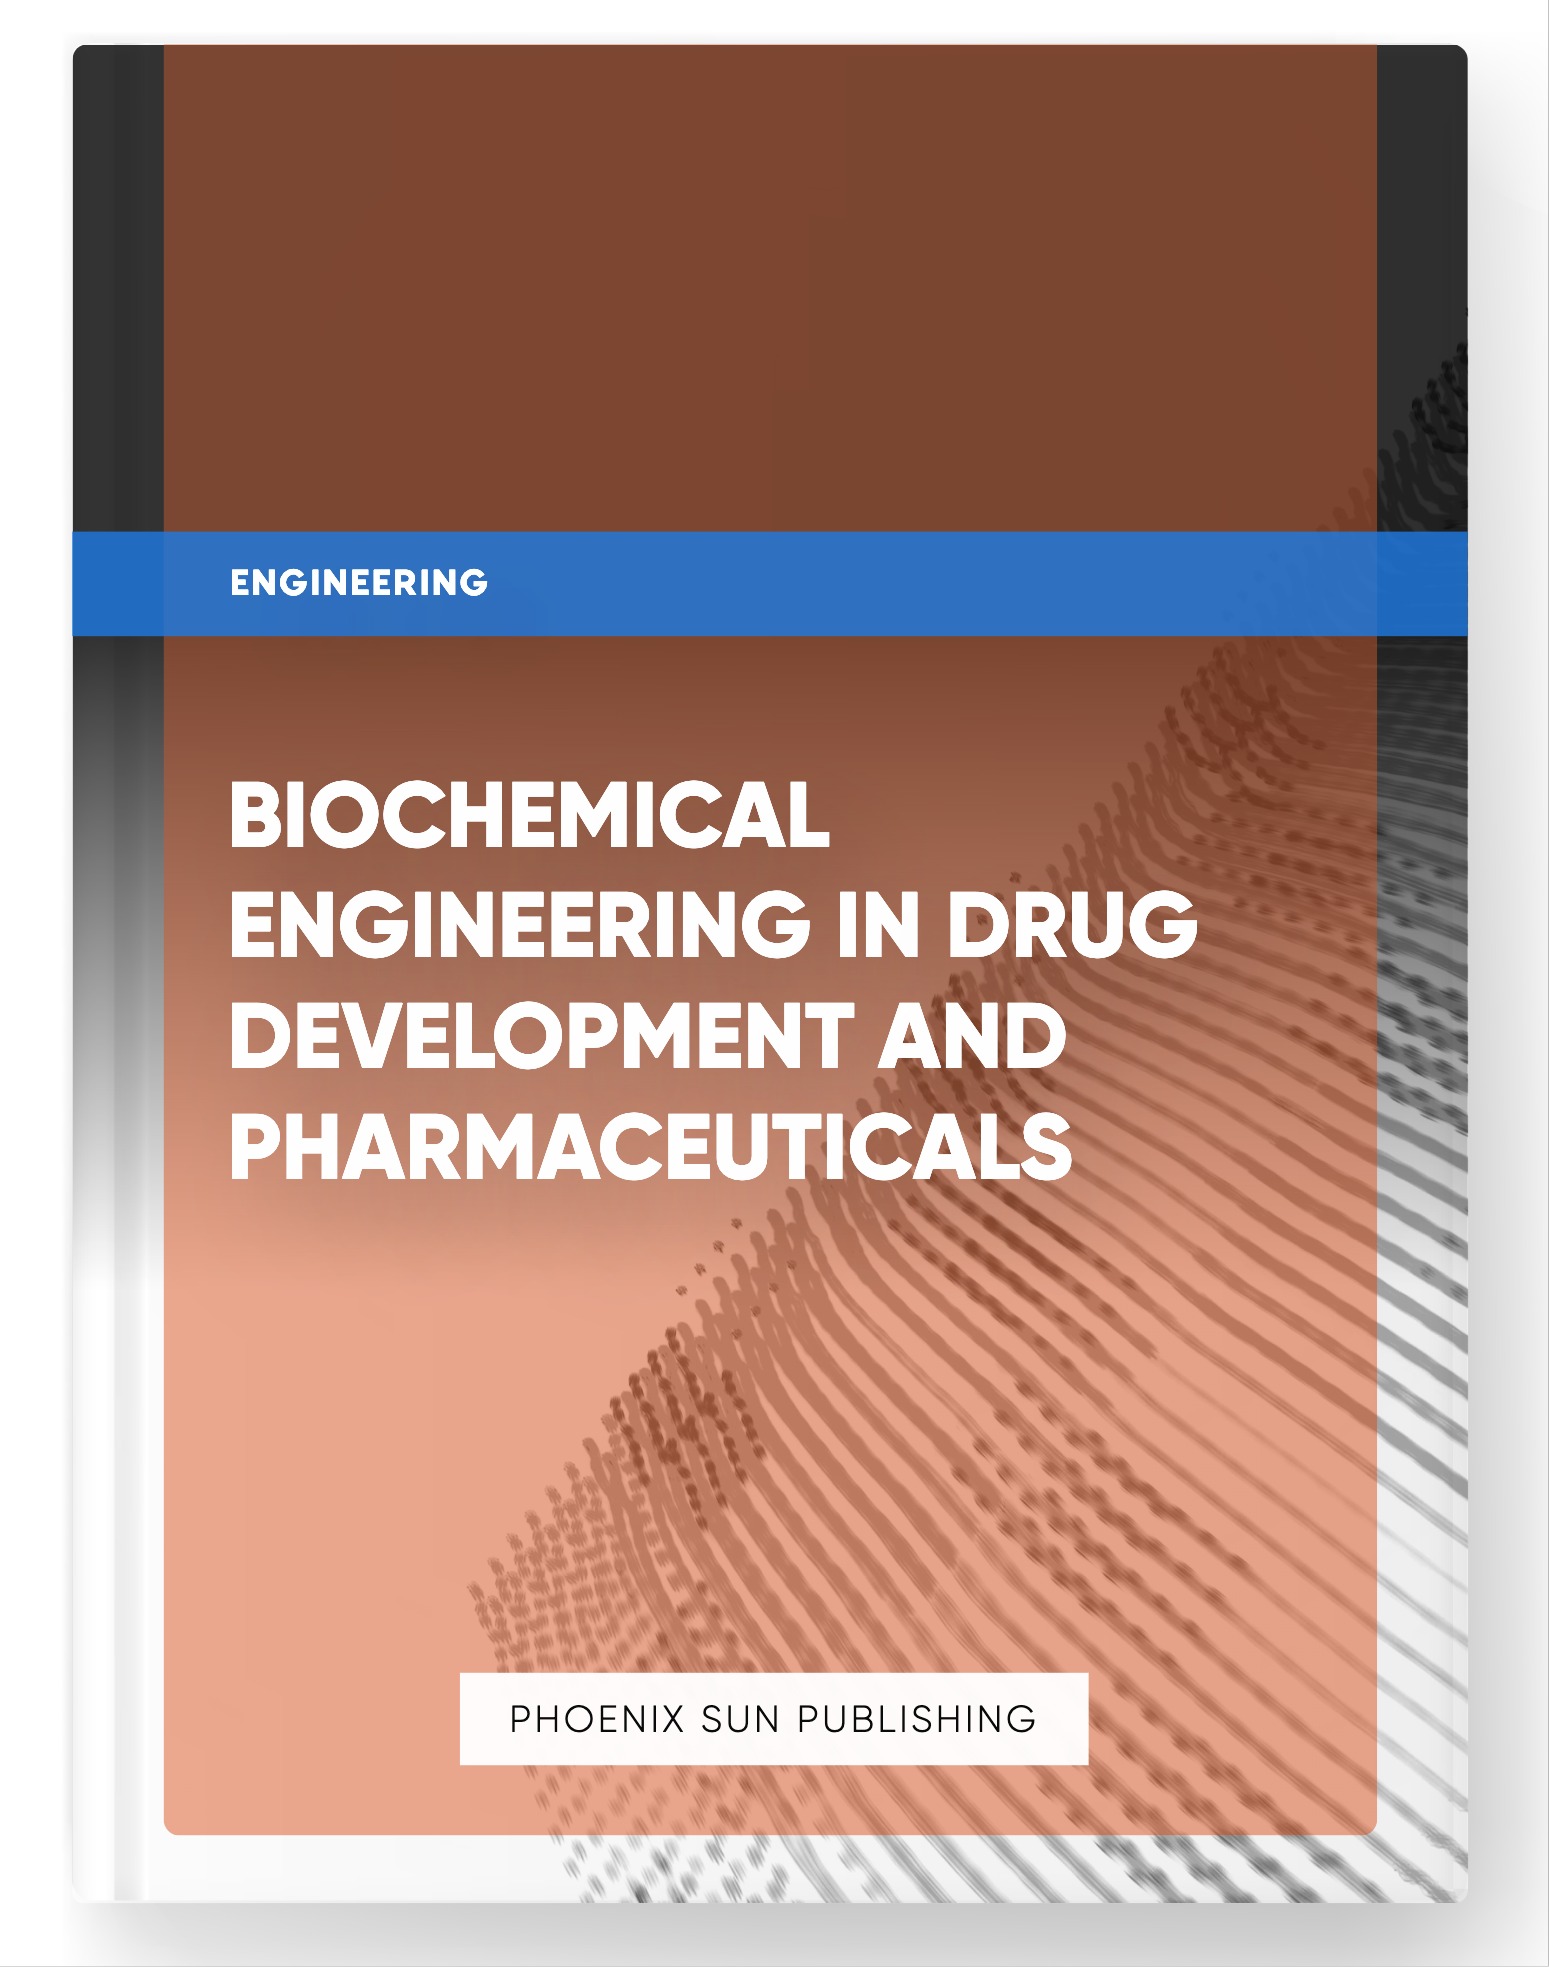 Biochemical Engineering in Drug Development and Pharmaceuticals